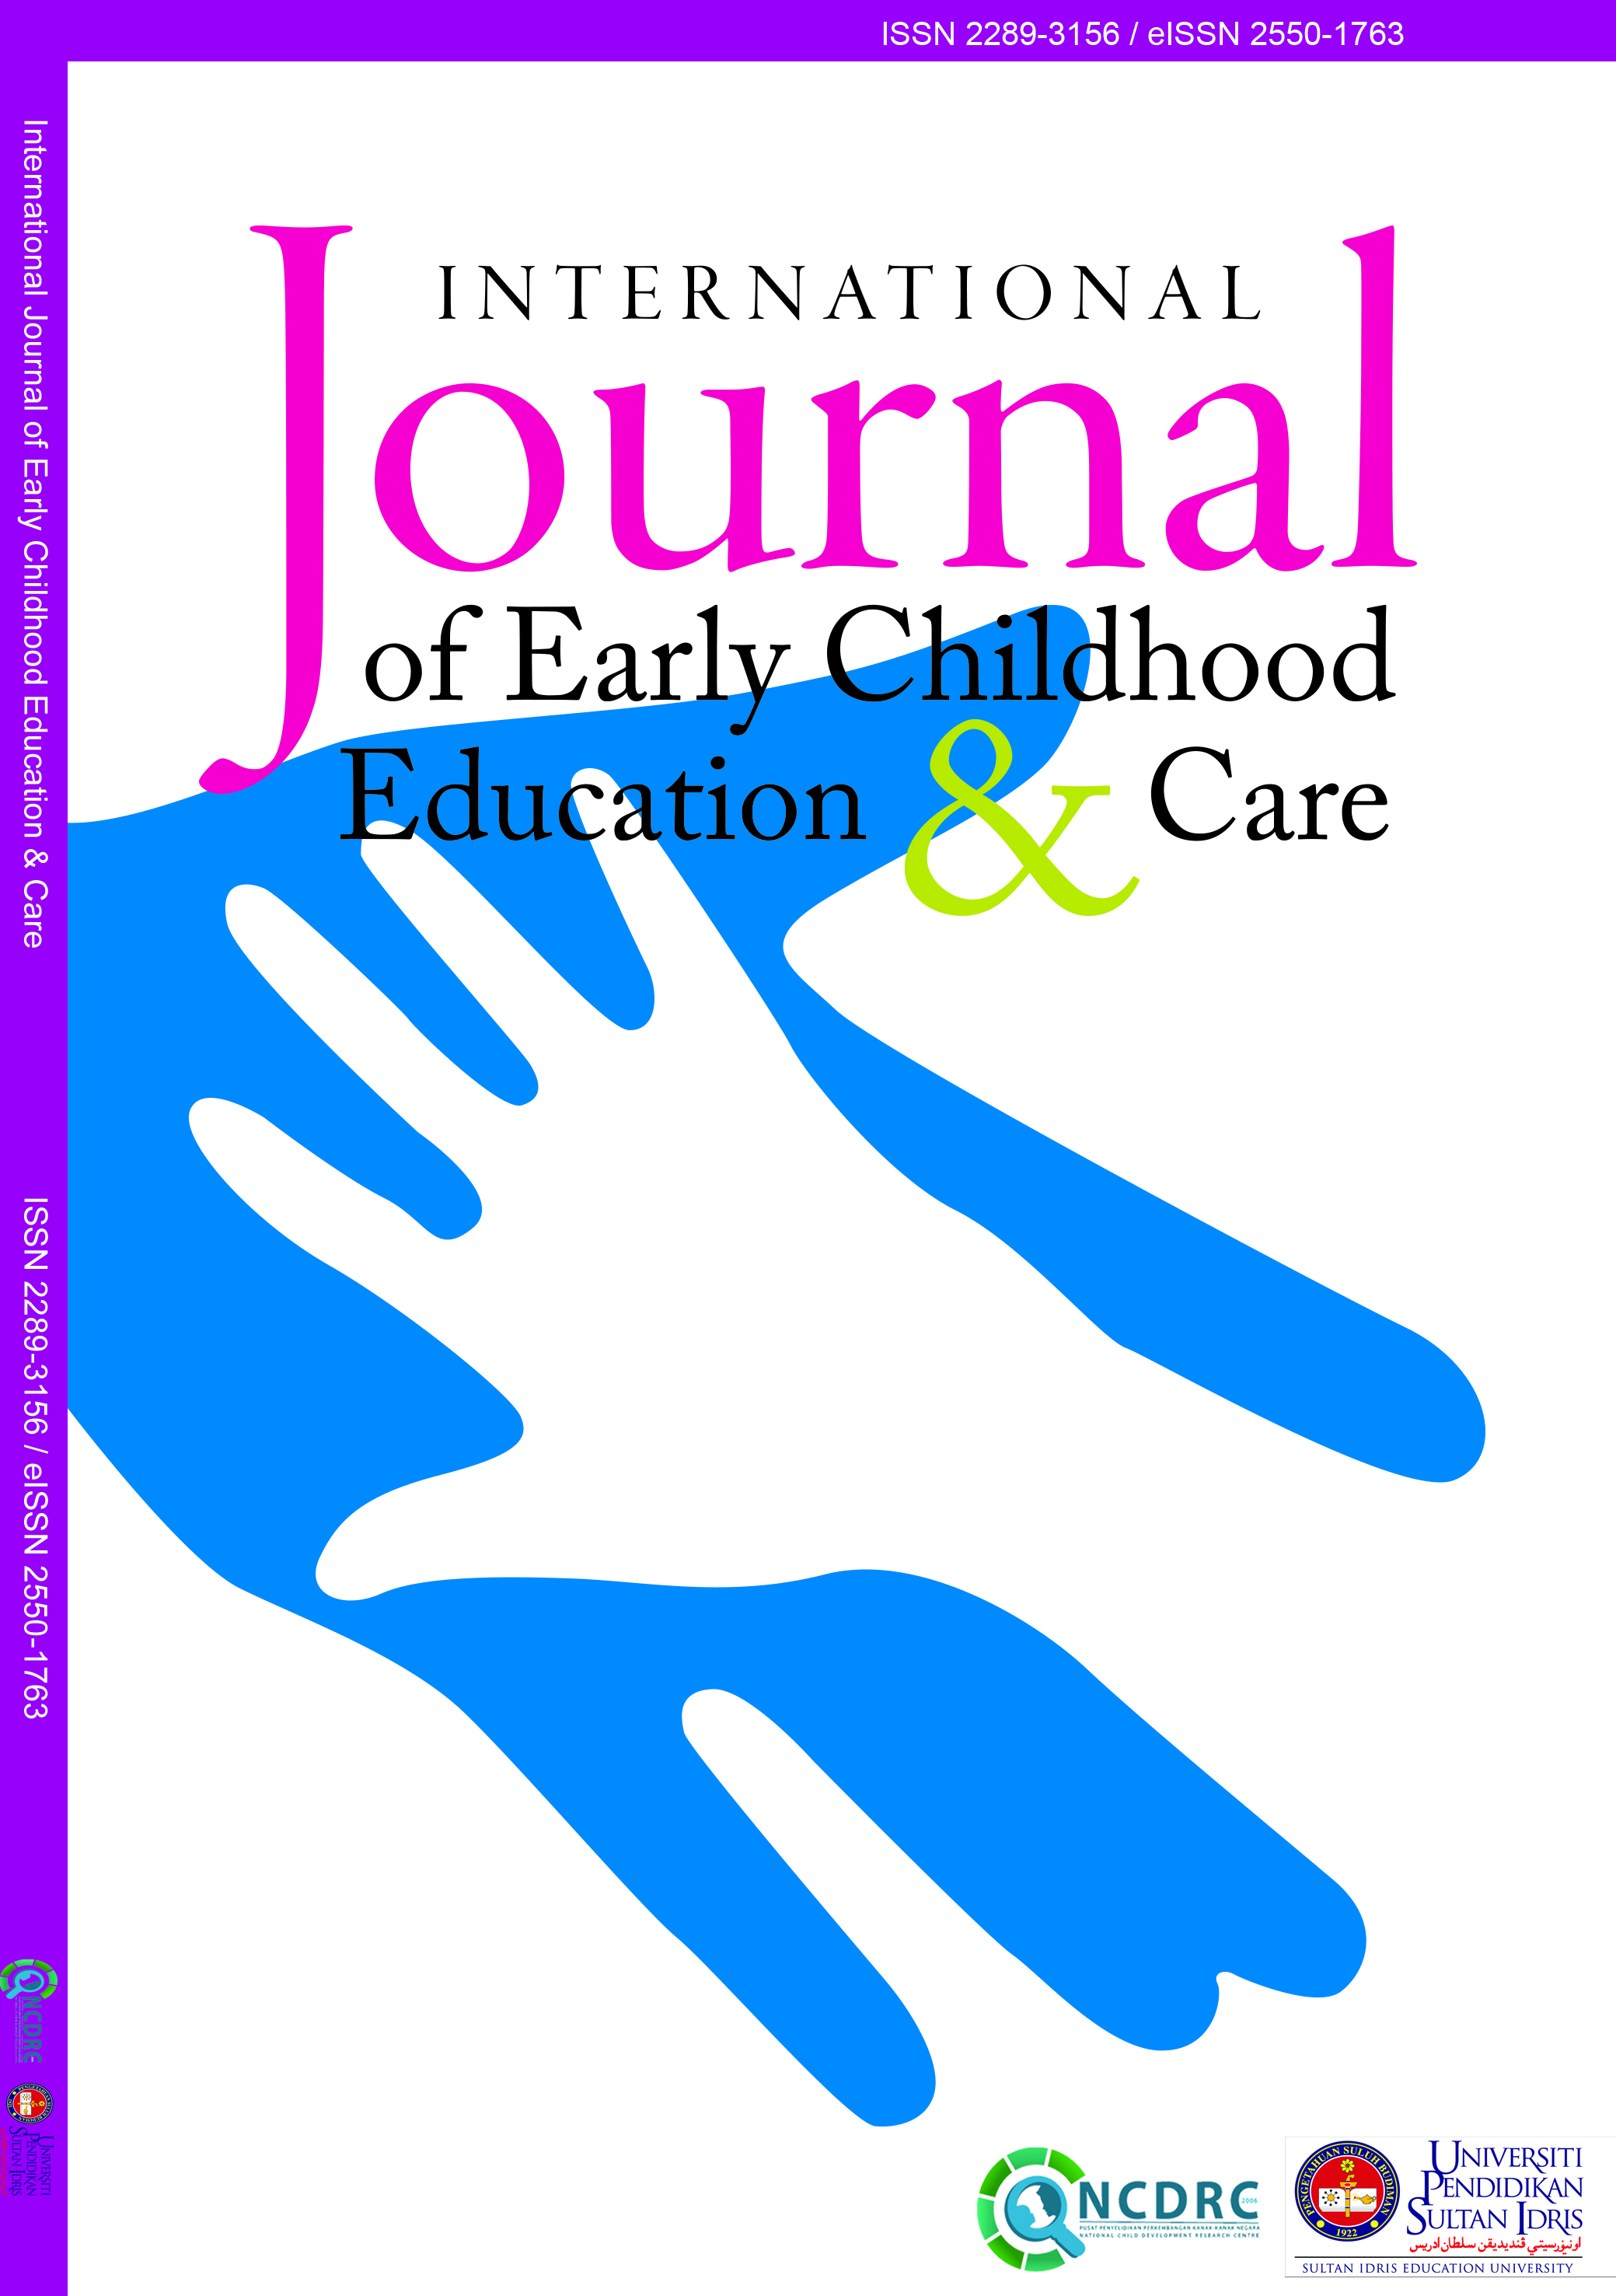 					View Vol. 1 (2012): International Journal of Early Childhood Education and Care
				